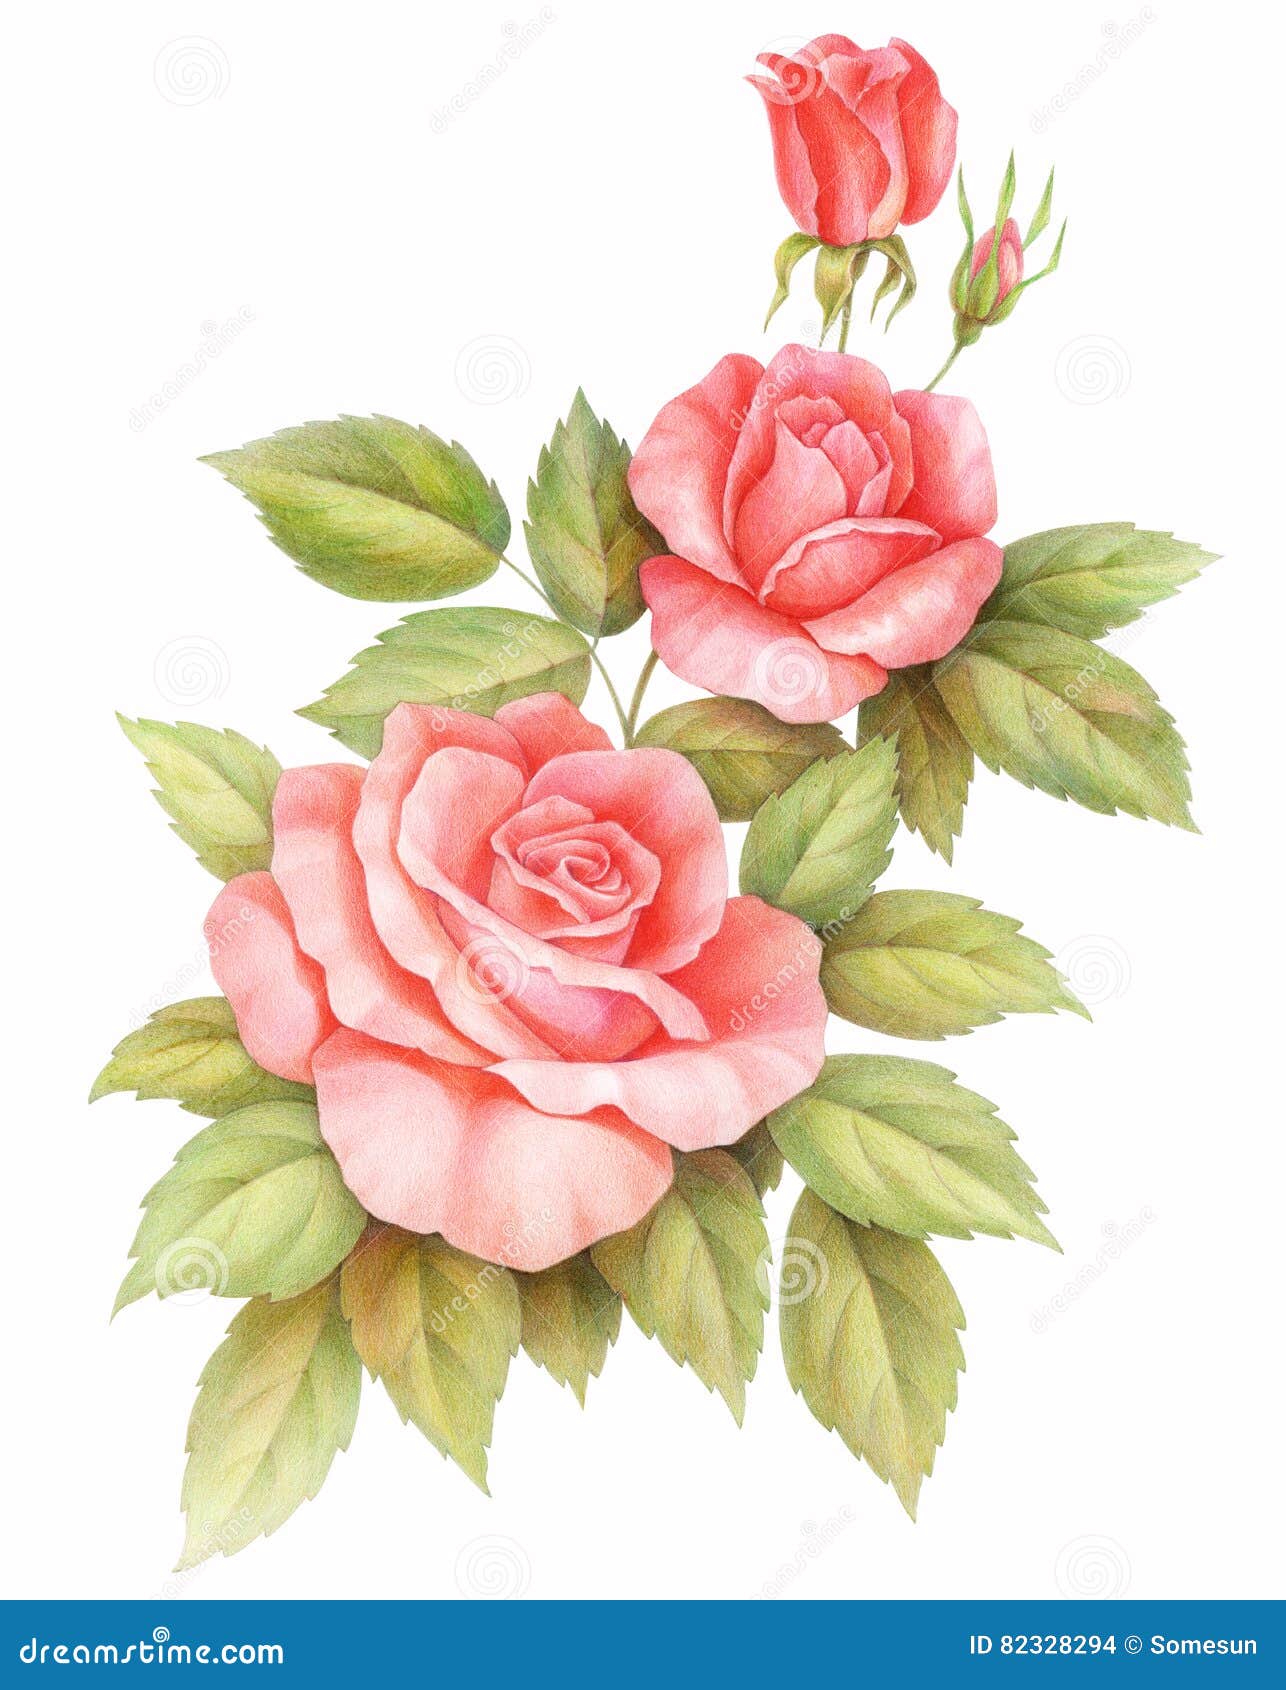 https://thumbs.dreamstime.com/z/pink-red-vintage-roses-flowers-isolated-white-background-colored-pencil-watercolor-illustration-floral-set-bouquet-bunch-82328294.jpg